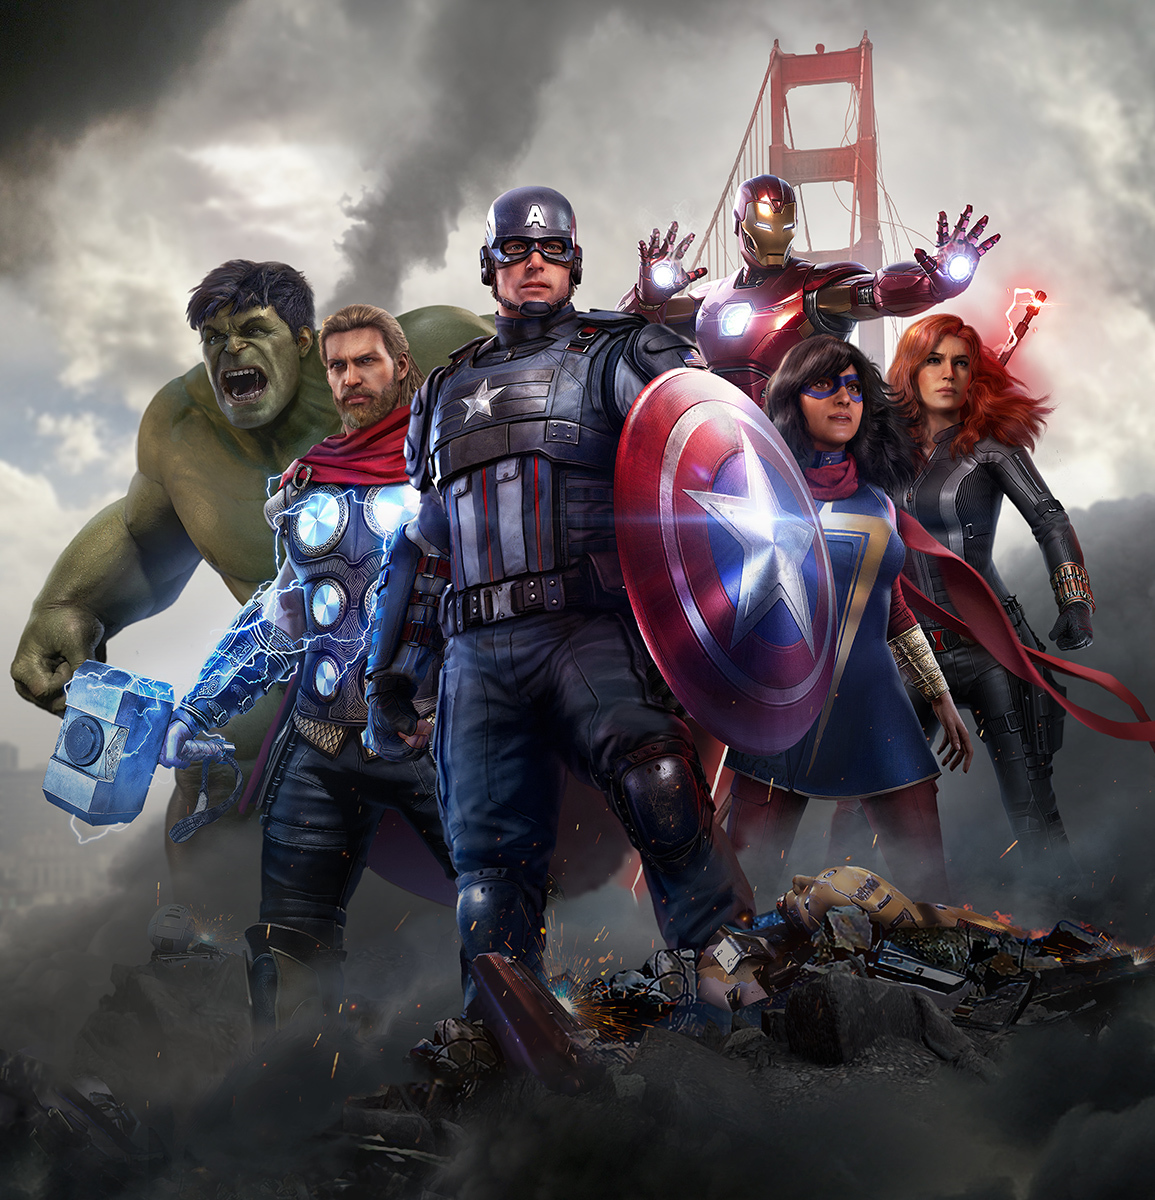 『Marvel’s Avengers（アベンジャーズ）』キービジュアル C)2020 MARVEL. Developed by Crystal Dynamics and Eidos Montréal. Development support provided by Nixxes. All rights reserved.